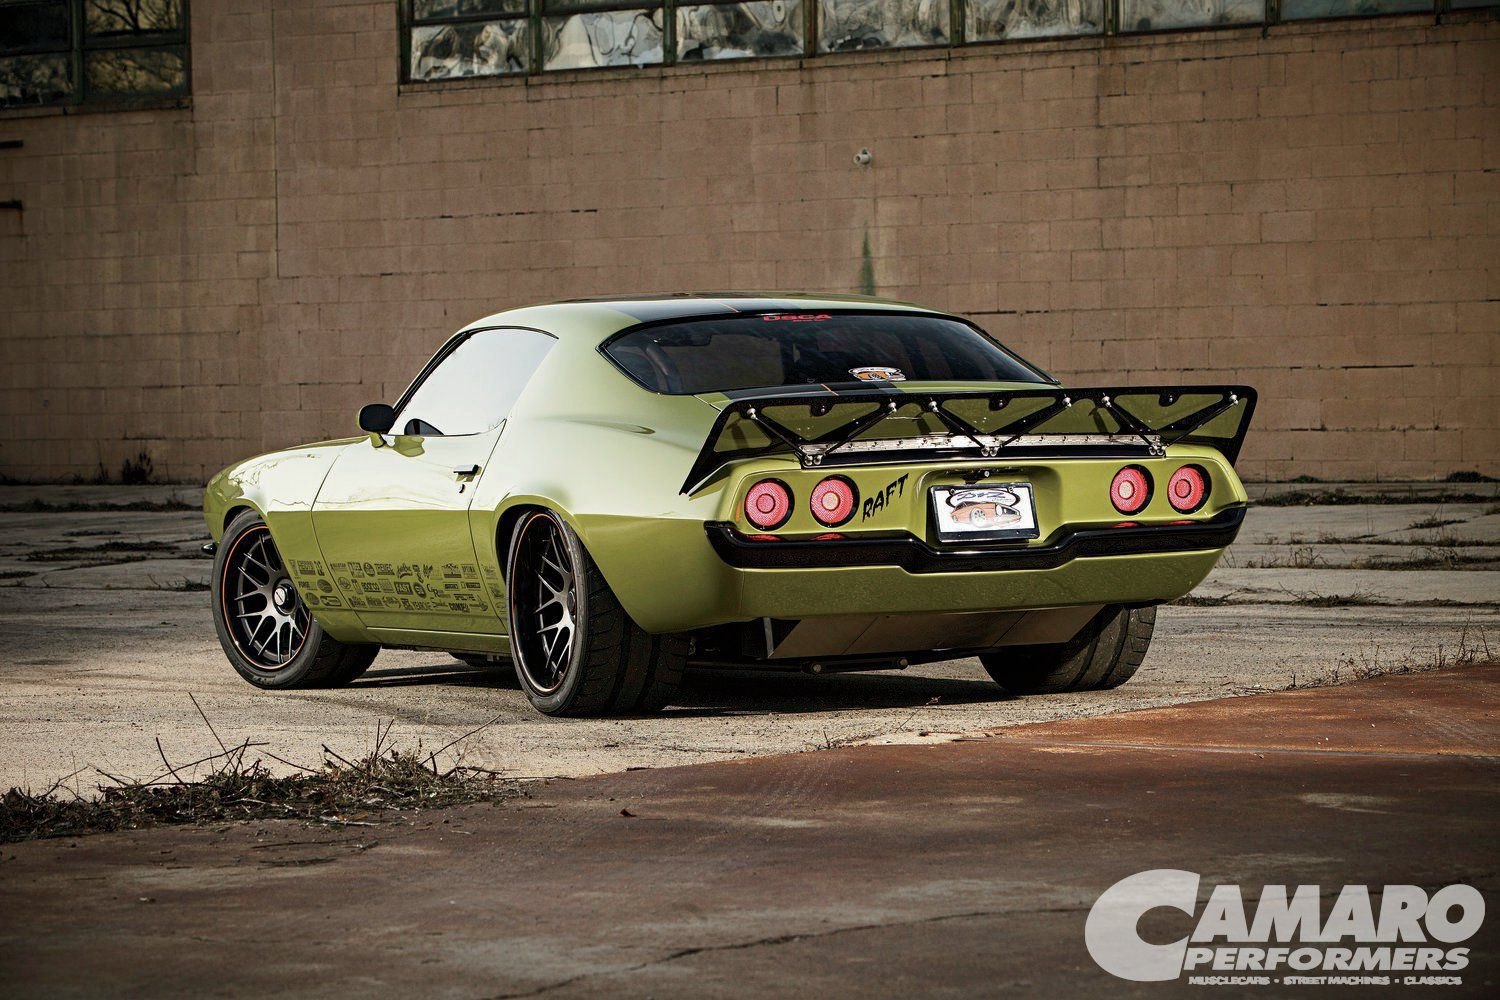 Aftermarket Rear Spoiler on Green Debadged Chevy Camaro - Photo by Forgeline Motorsports